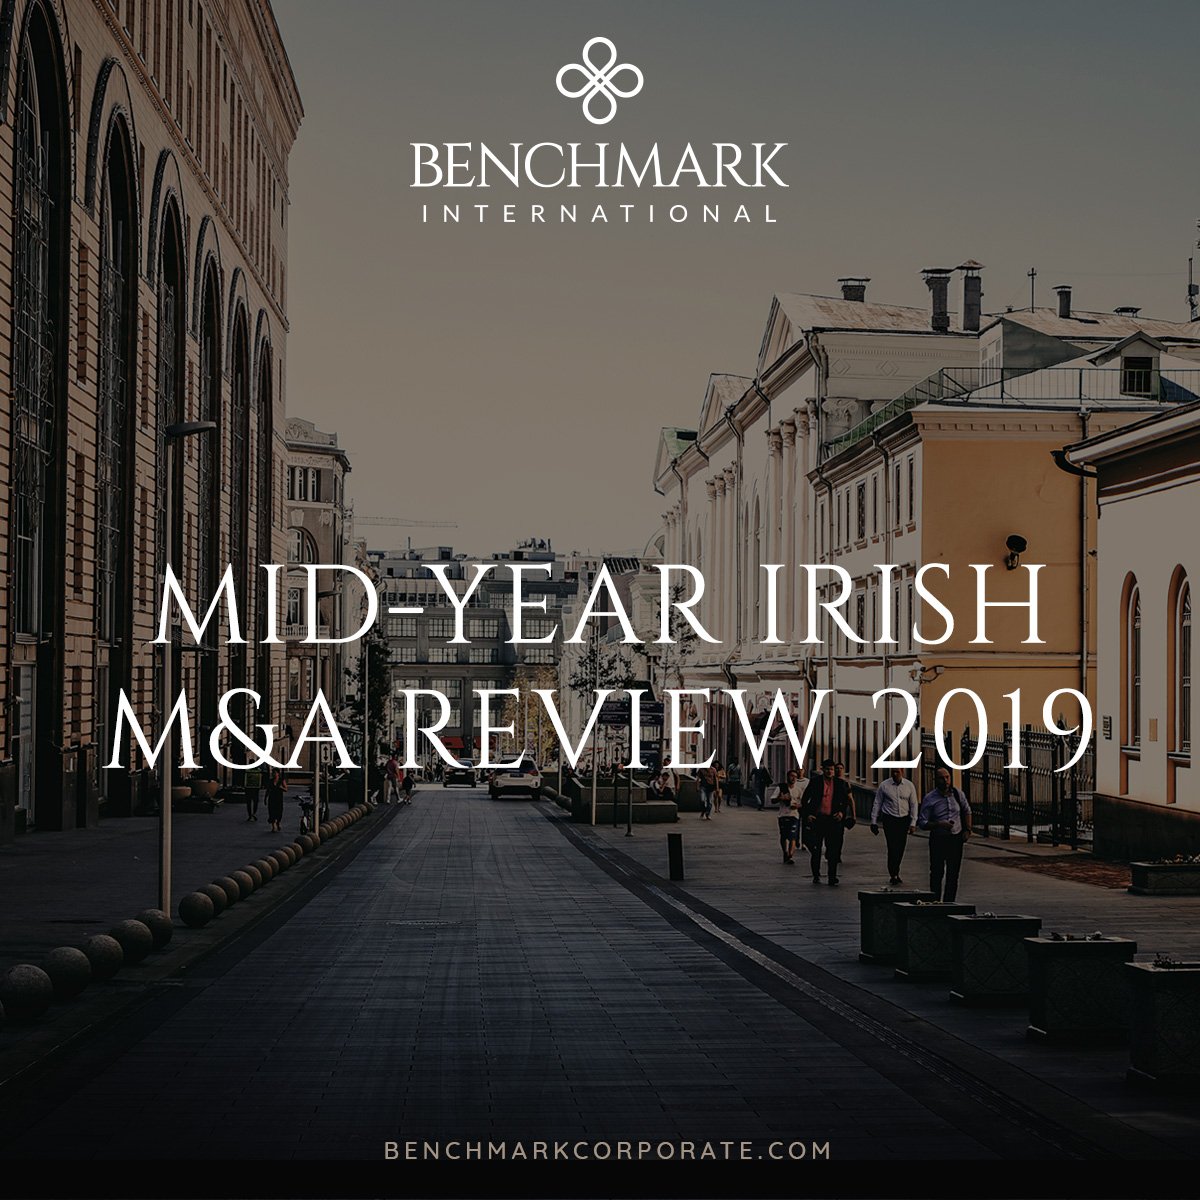 Mid-Year Irish M&A Review 2019